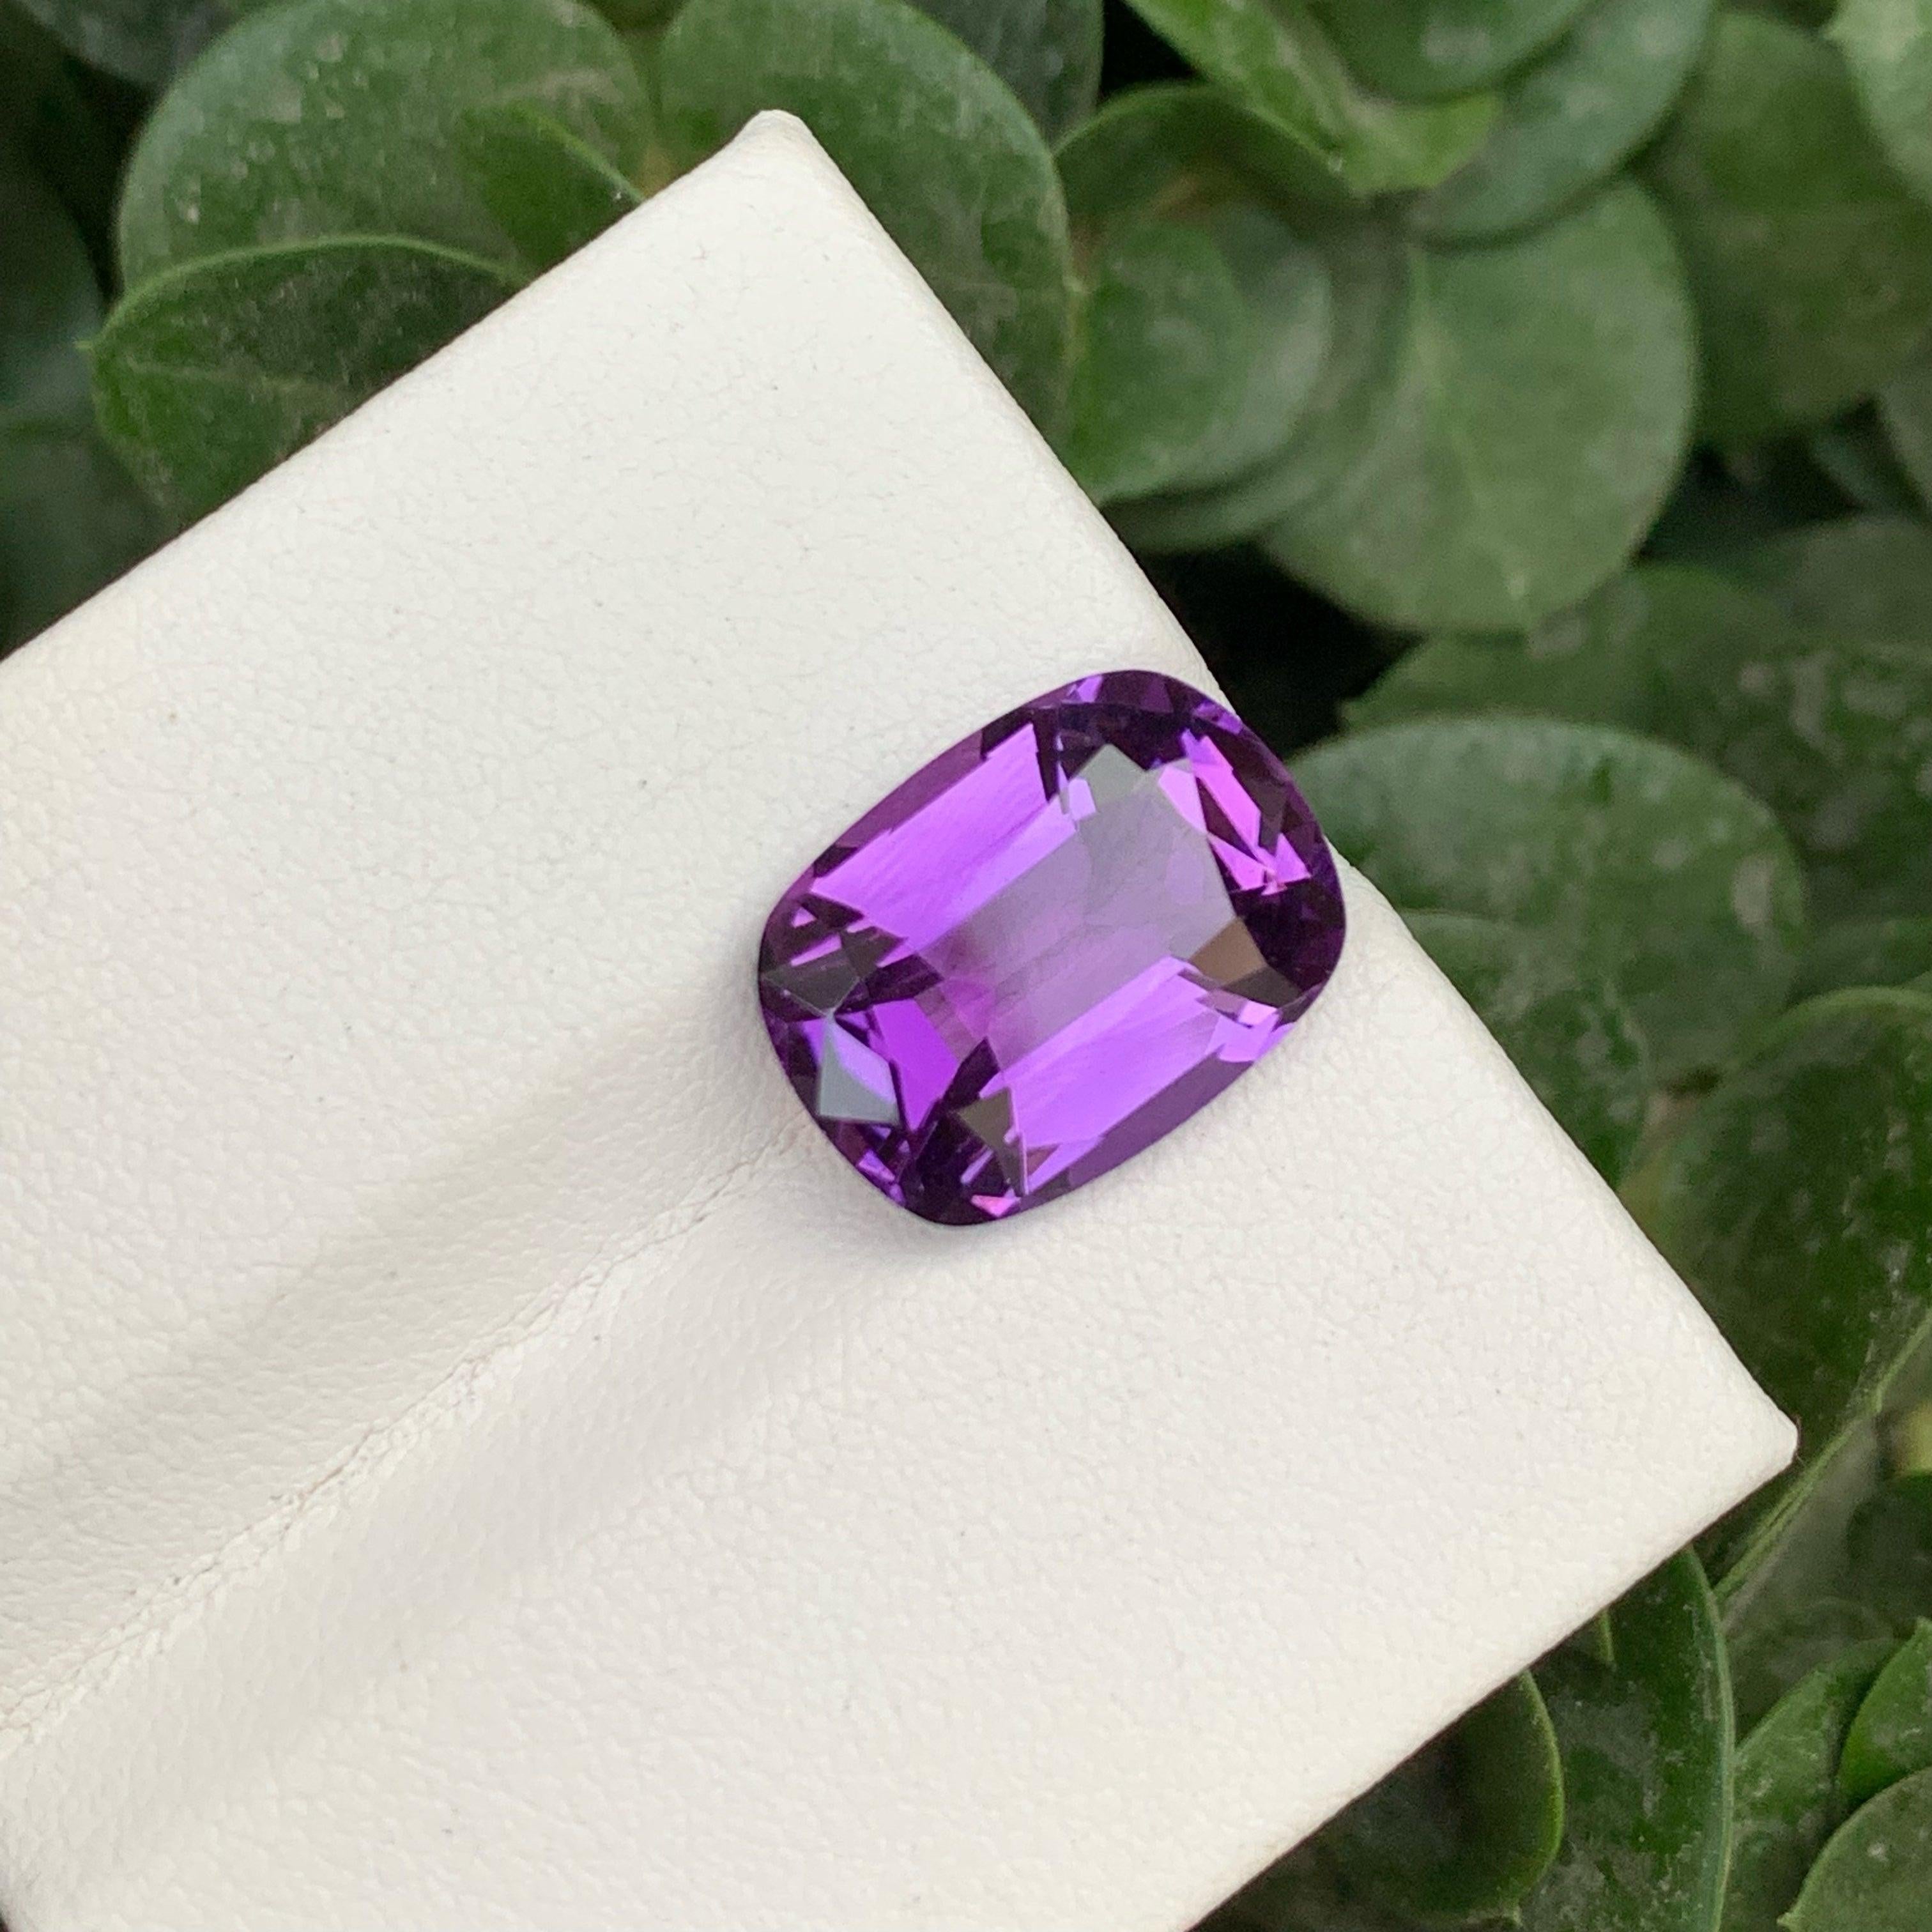 Fabulous Purple Natural Amethyst Stone, Available for sale at wholesale price natural high quality at 6.30 Carats Eye Clean Clarity Loose Amethyst From Brazil.
 
Product Information:
GEMSTONE TYPE:	Fabulous Purple Natural Amethyst Stone
WEIGHT:	6.30